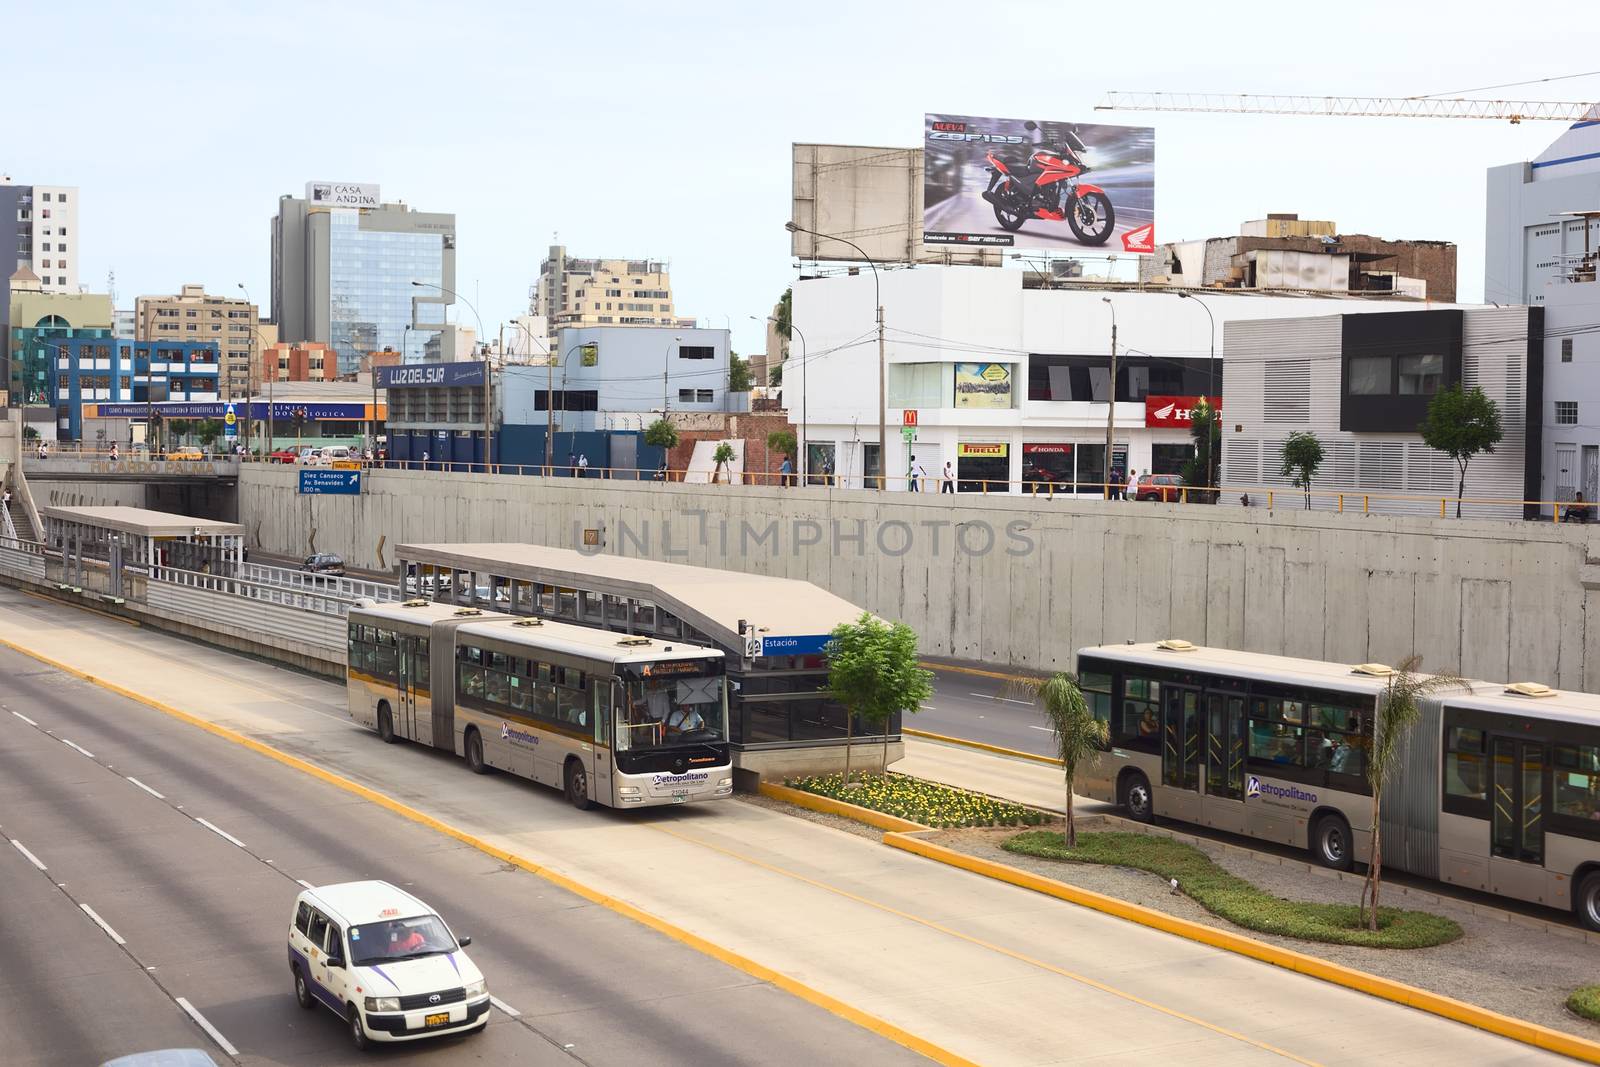 LIMA, PERU - FEBRUARY 13, 2012: Metropolitano bus of the Line A stopping at the crossing of the Avenues Ricardo Palma and Paseo de la Republica in Miraflores on February 13, 2012 in Lima, Peru. The Metropolitano is a Bus rapid transit system operating since 2010 in Lima running from North to South.